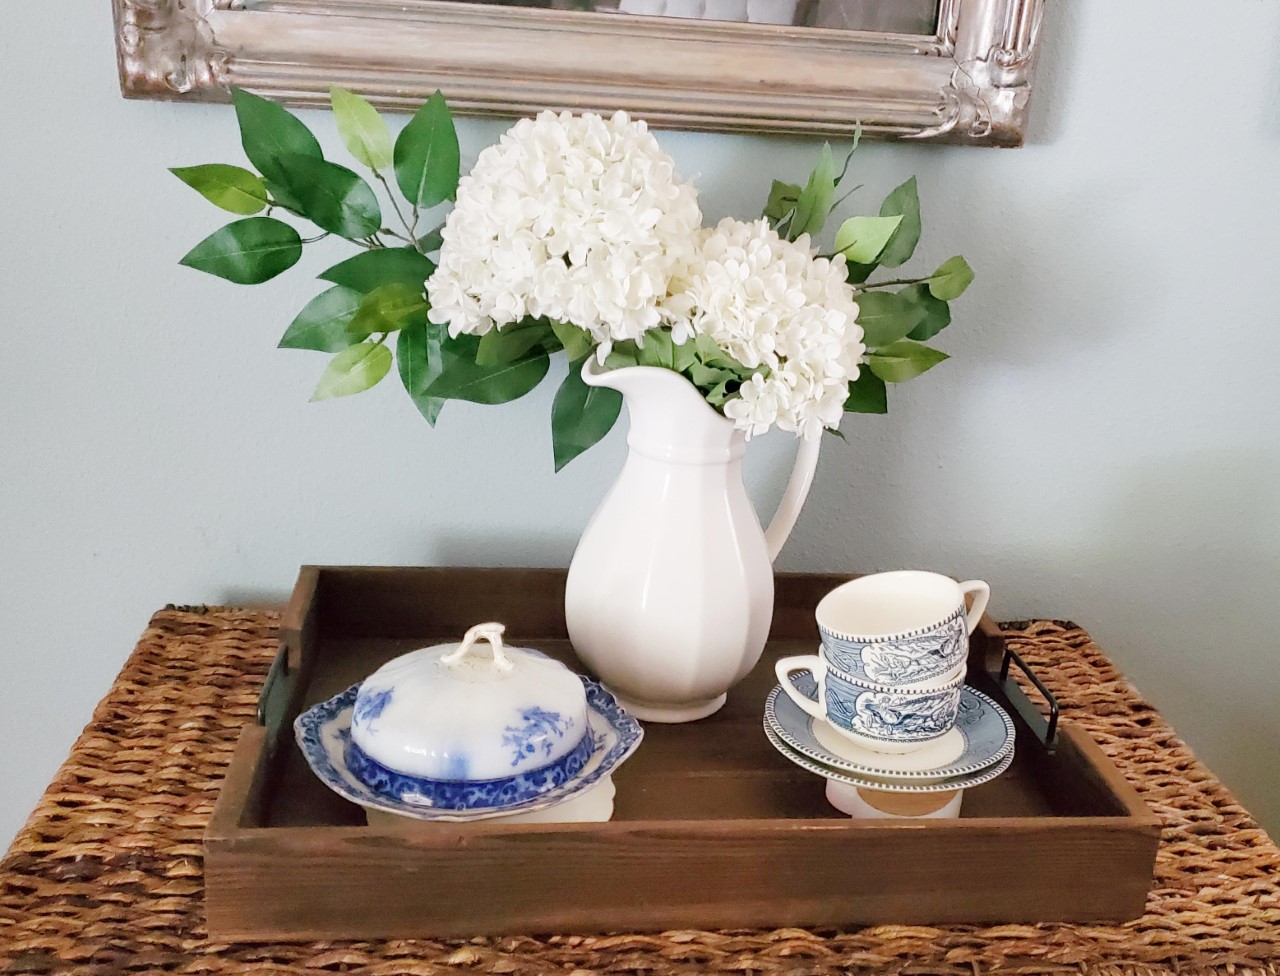 How to Style Vintage Ironstone in Your Home